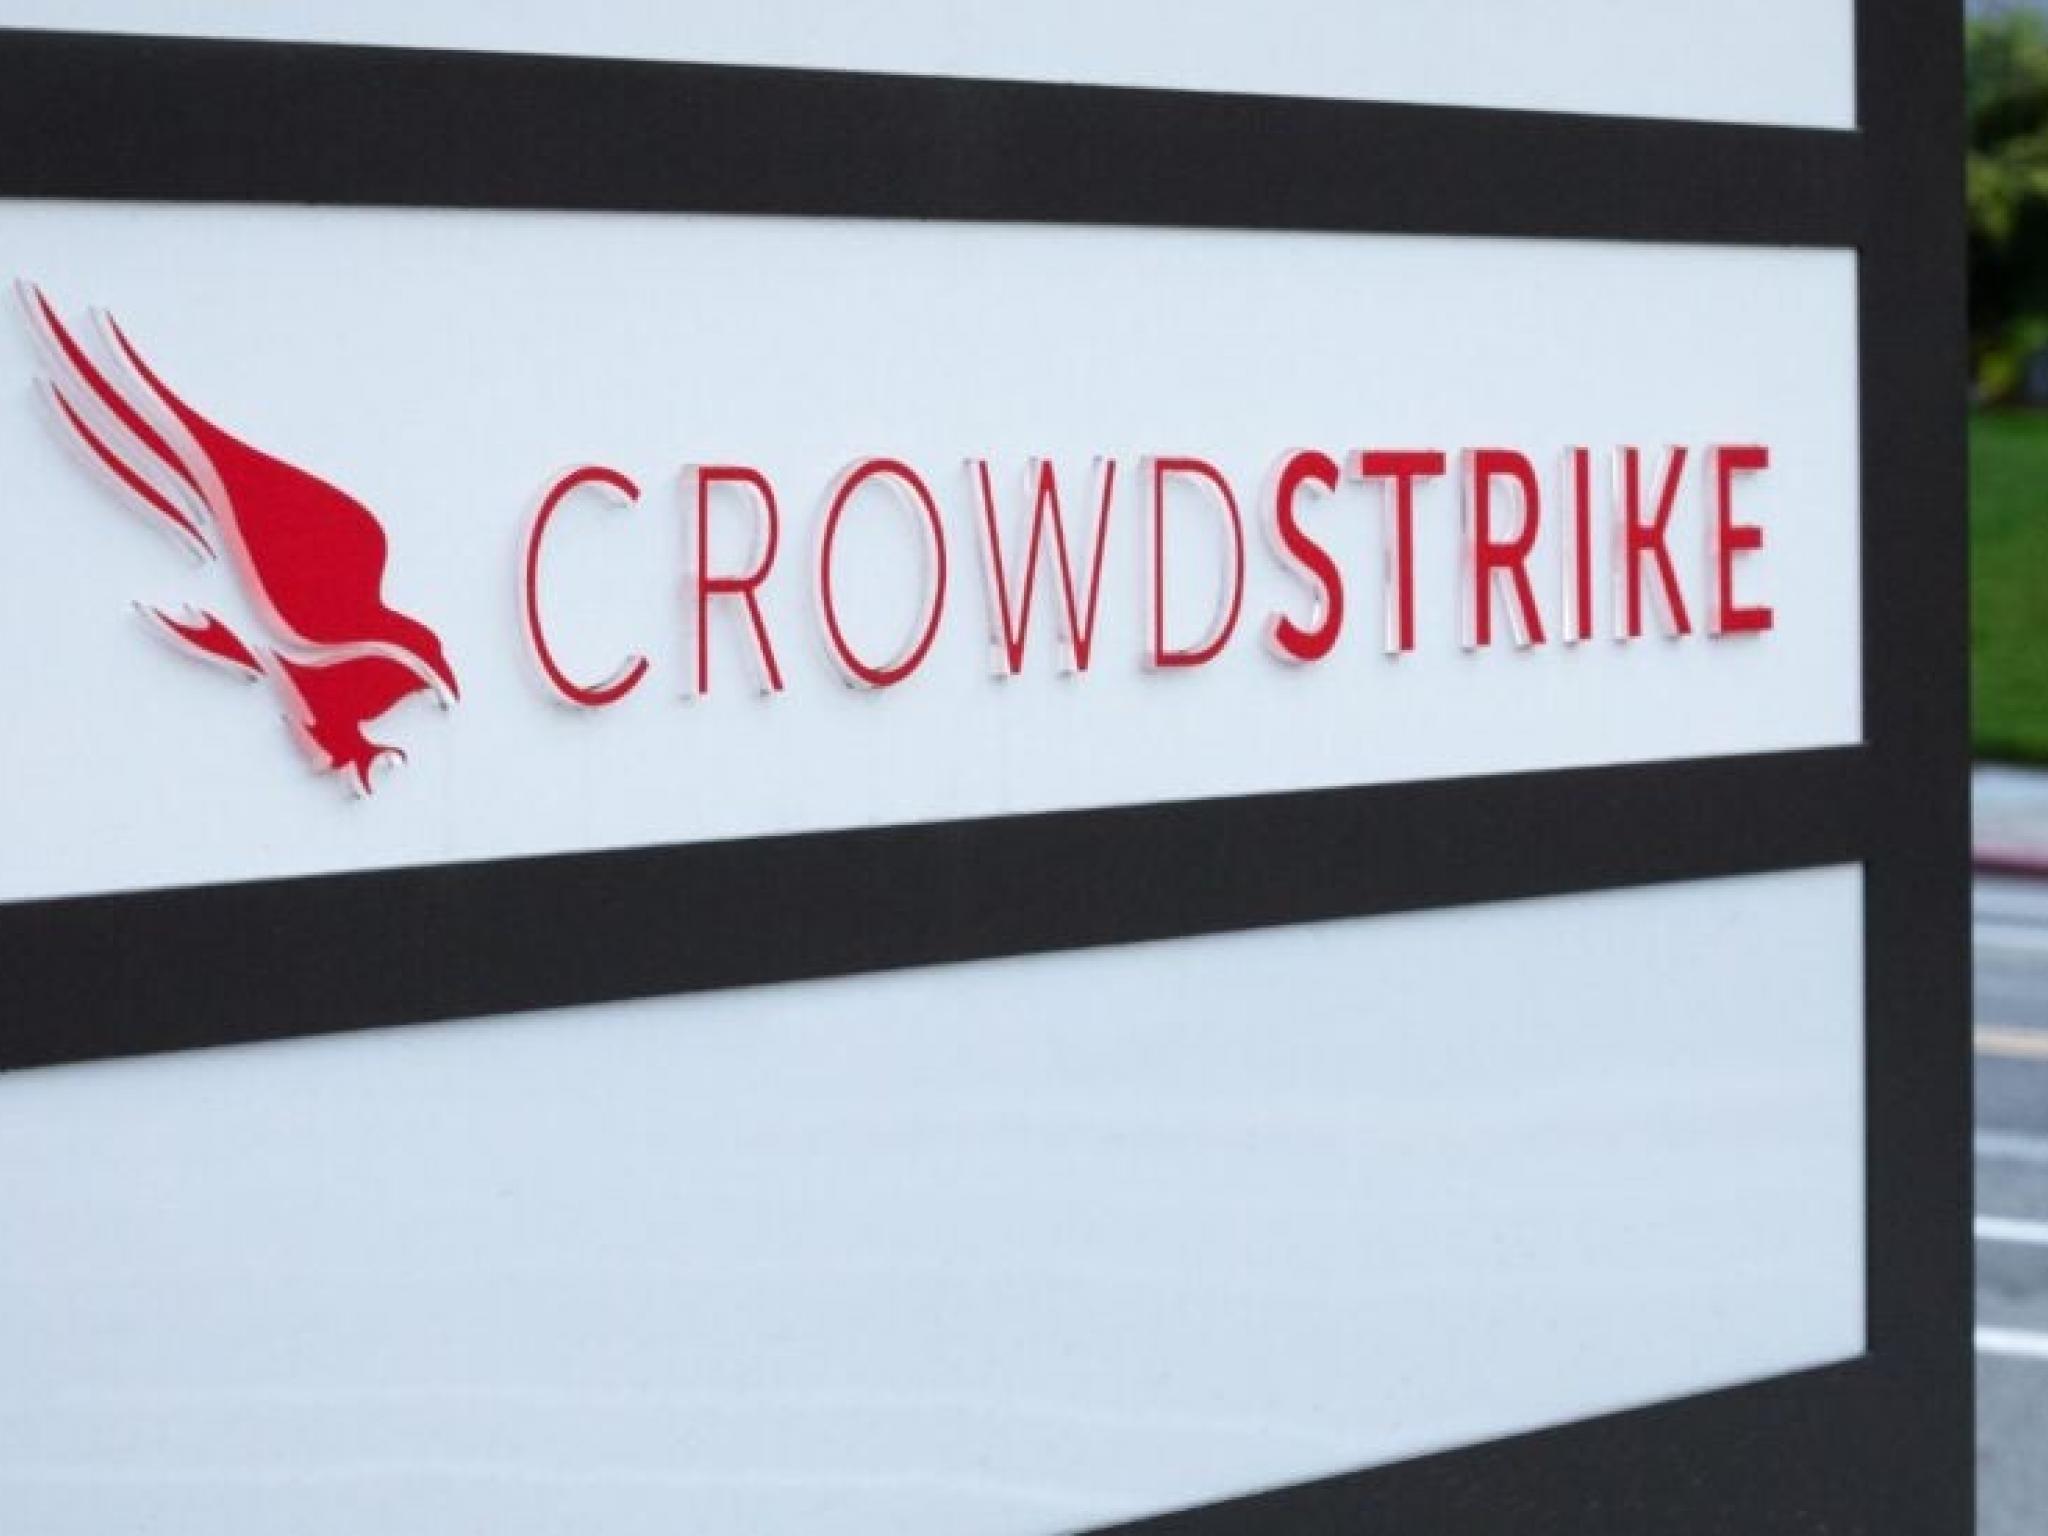  crowdstrike-faces-downgrades-amid-concerns-over-pricing-and-renewals-following-disruption 